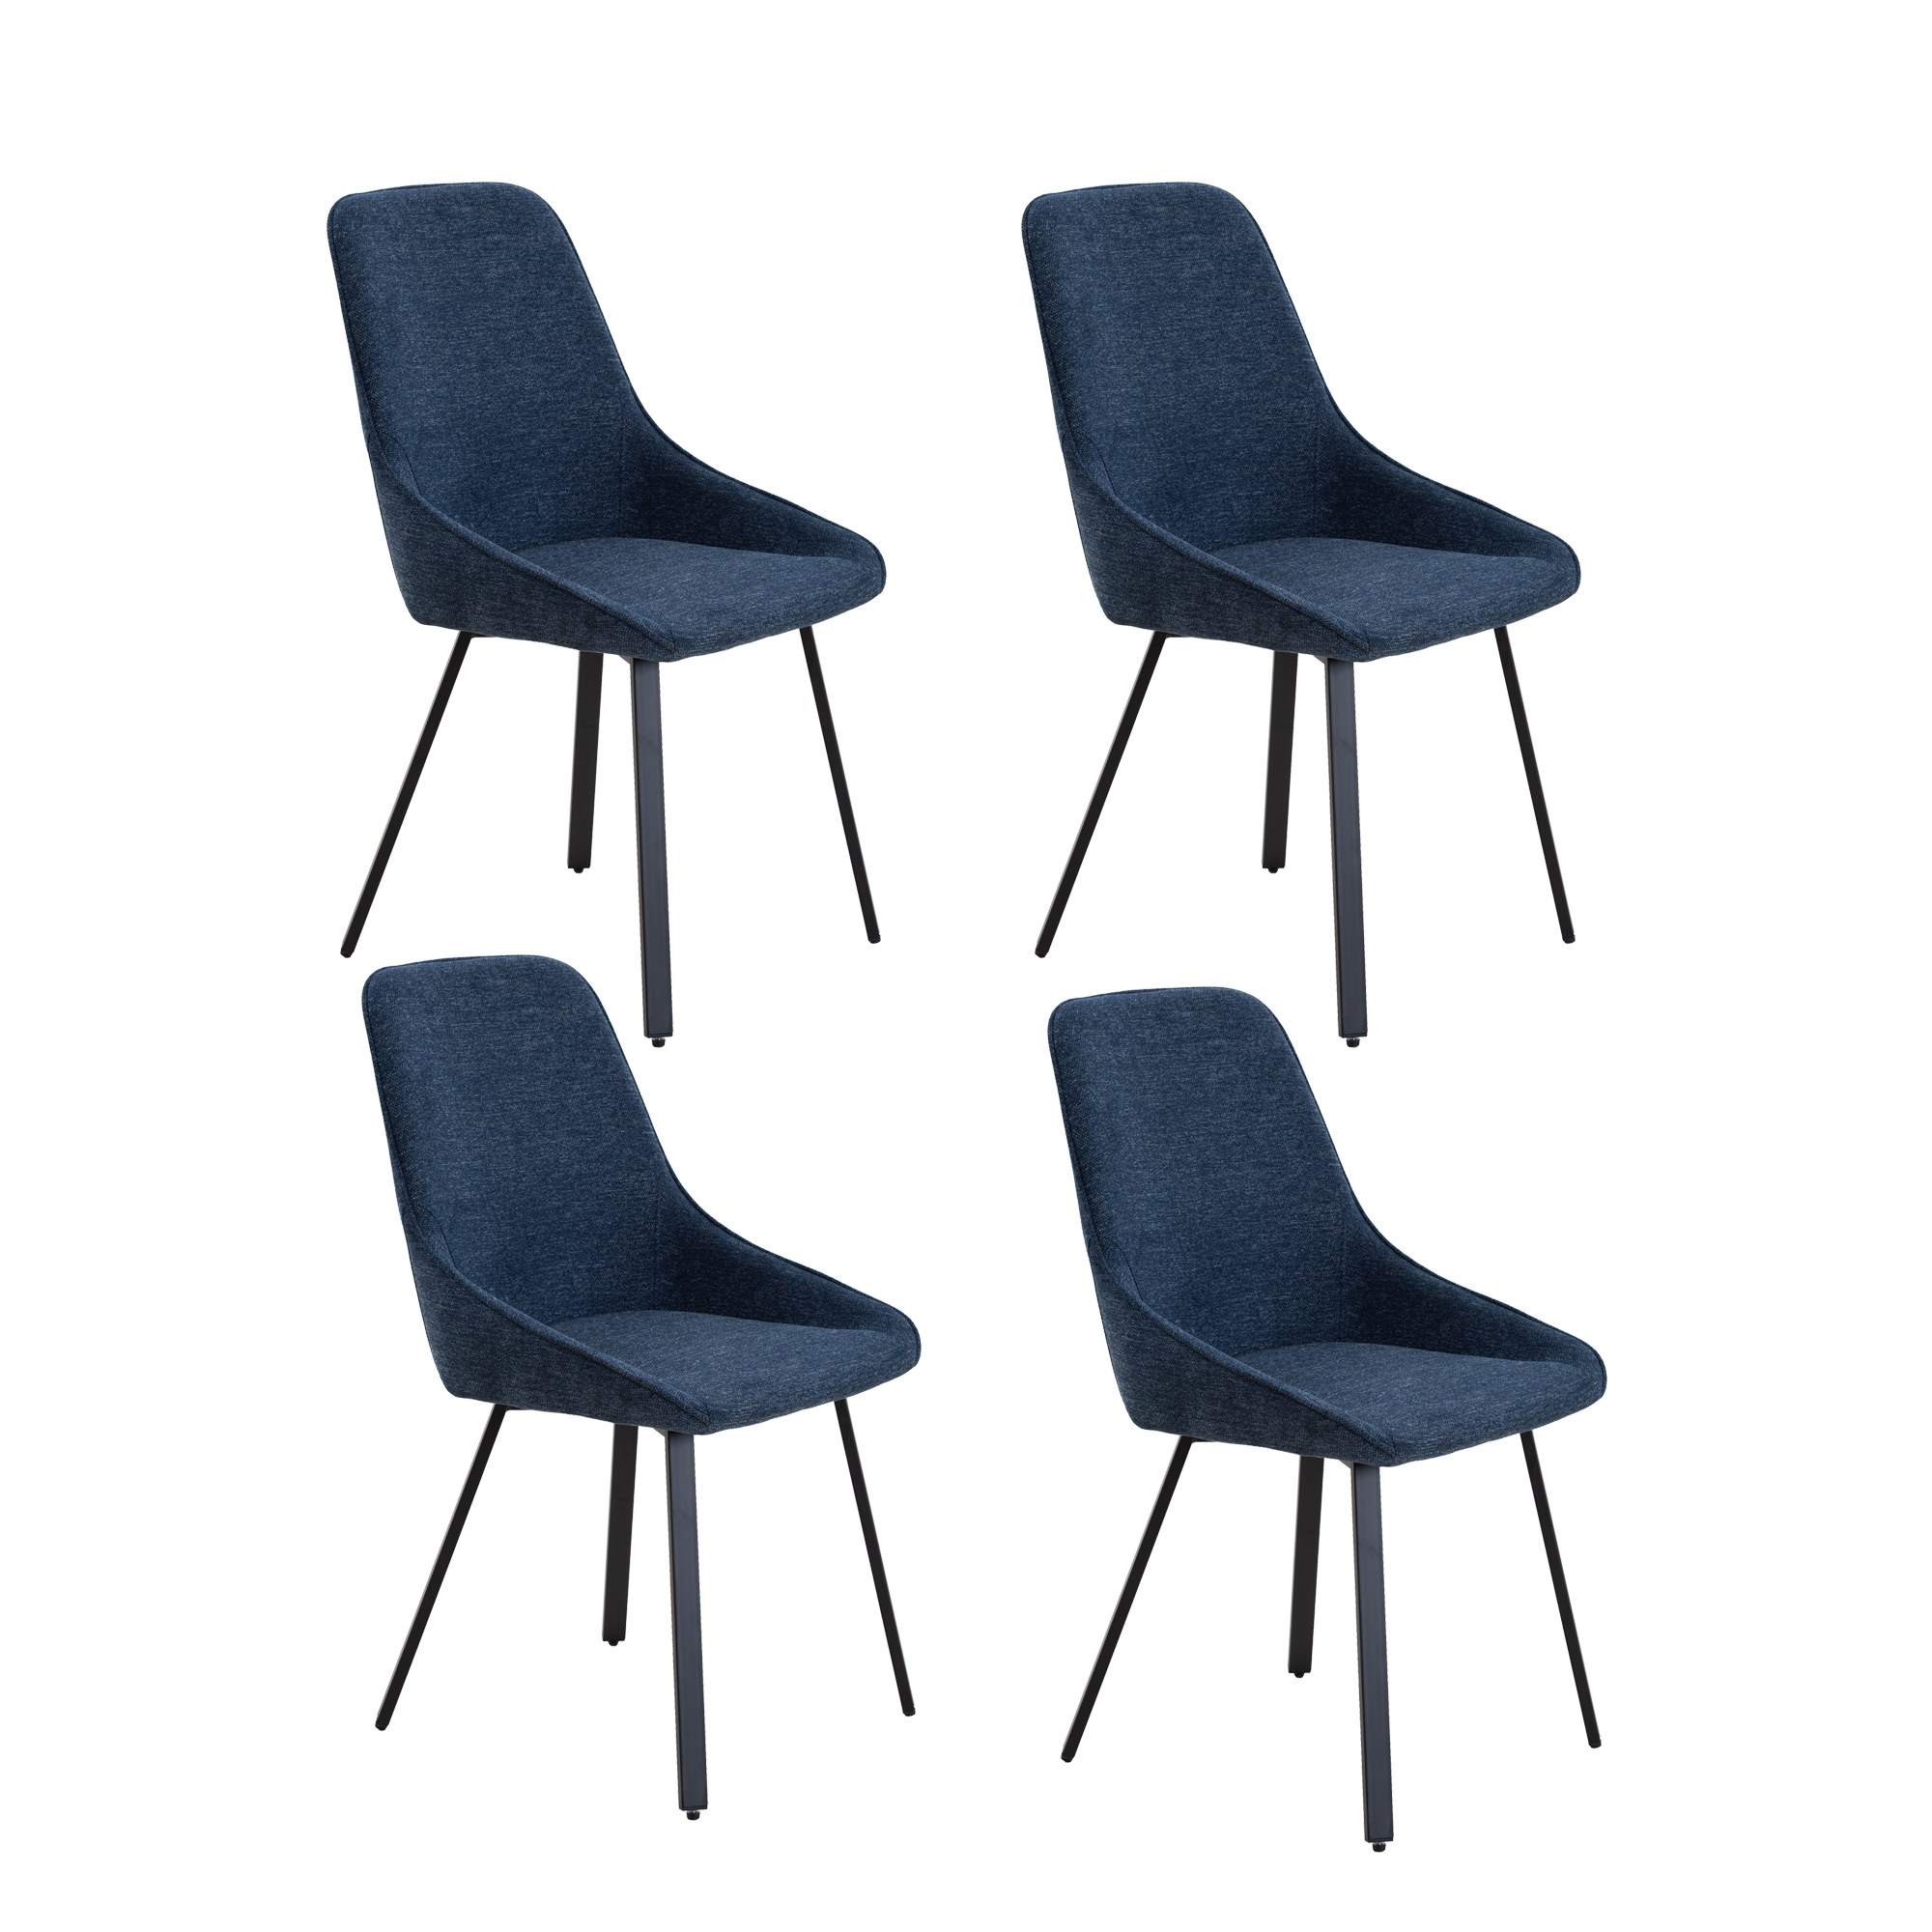 Dining Chairs set of 4, Upholstered Side Chairs, Adjustable Kitchen Chairs Accent Chair Cushion Upholstered Seat with Metal Legs for Living Room Blue